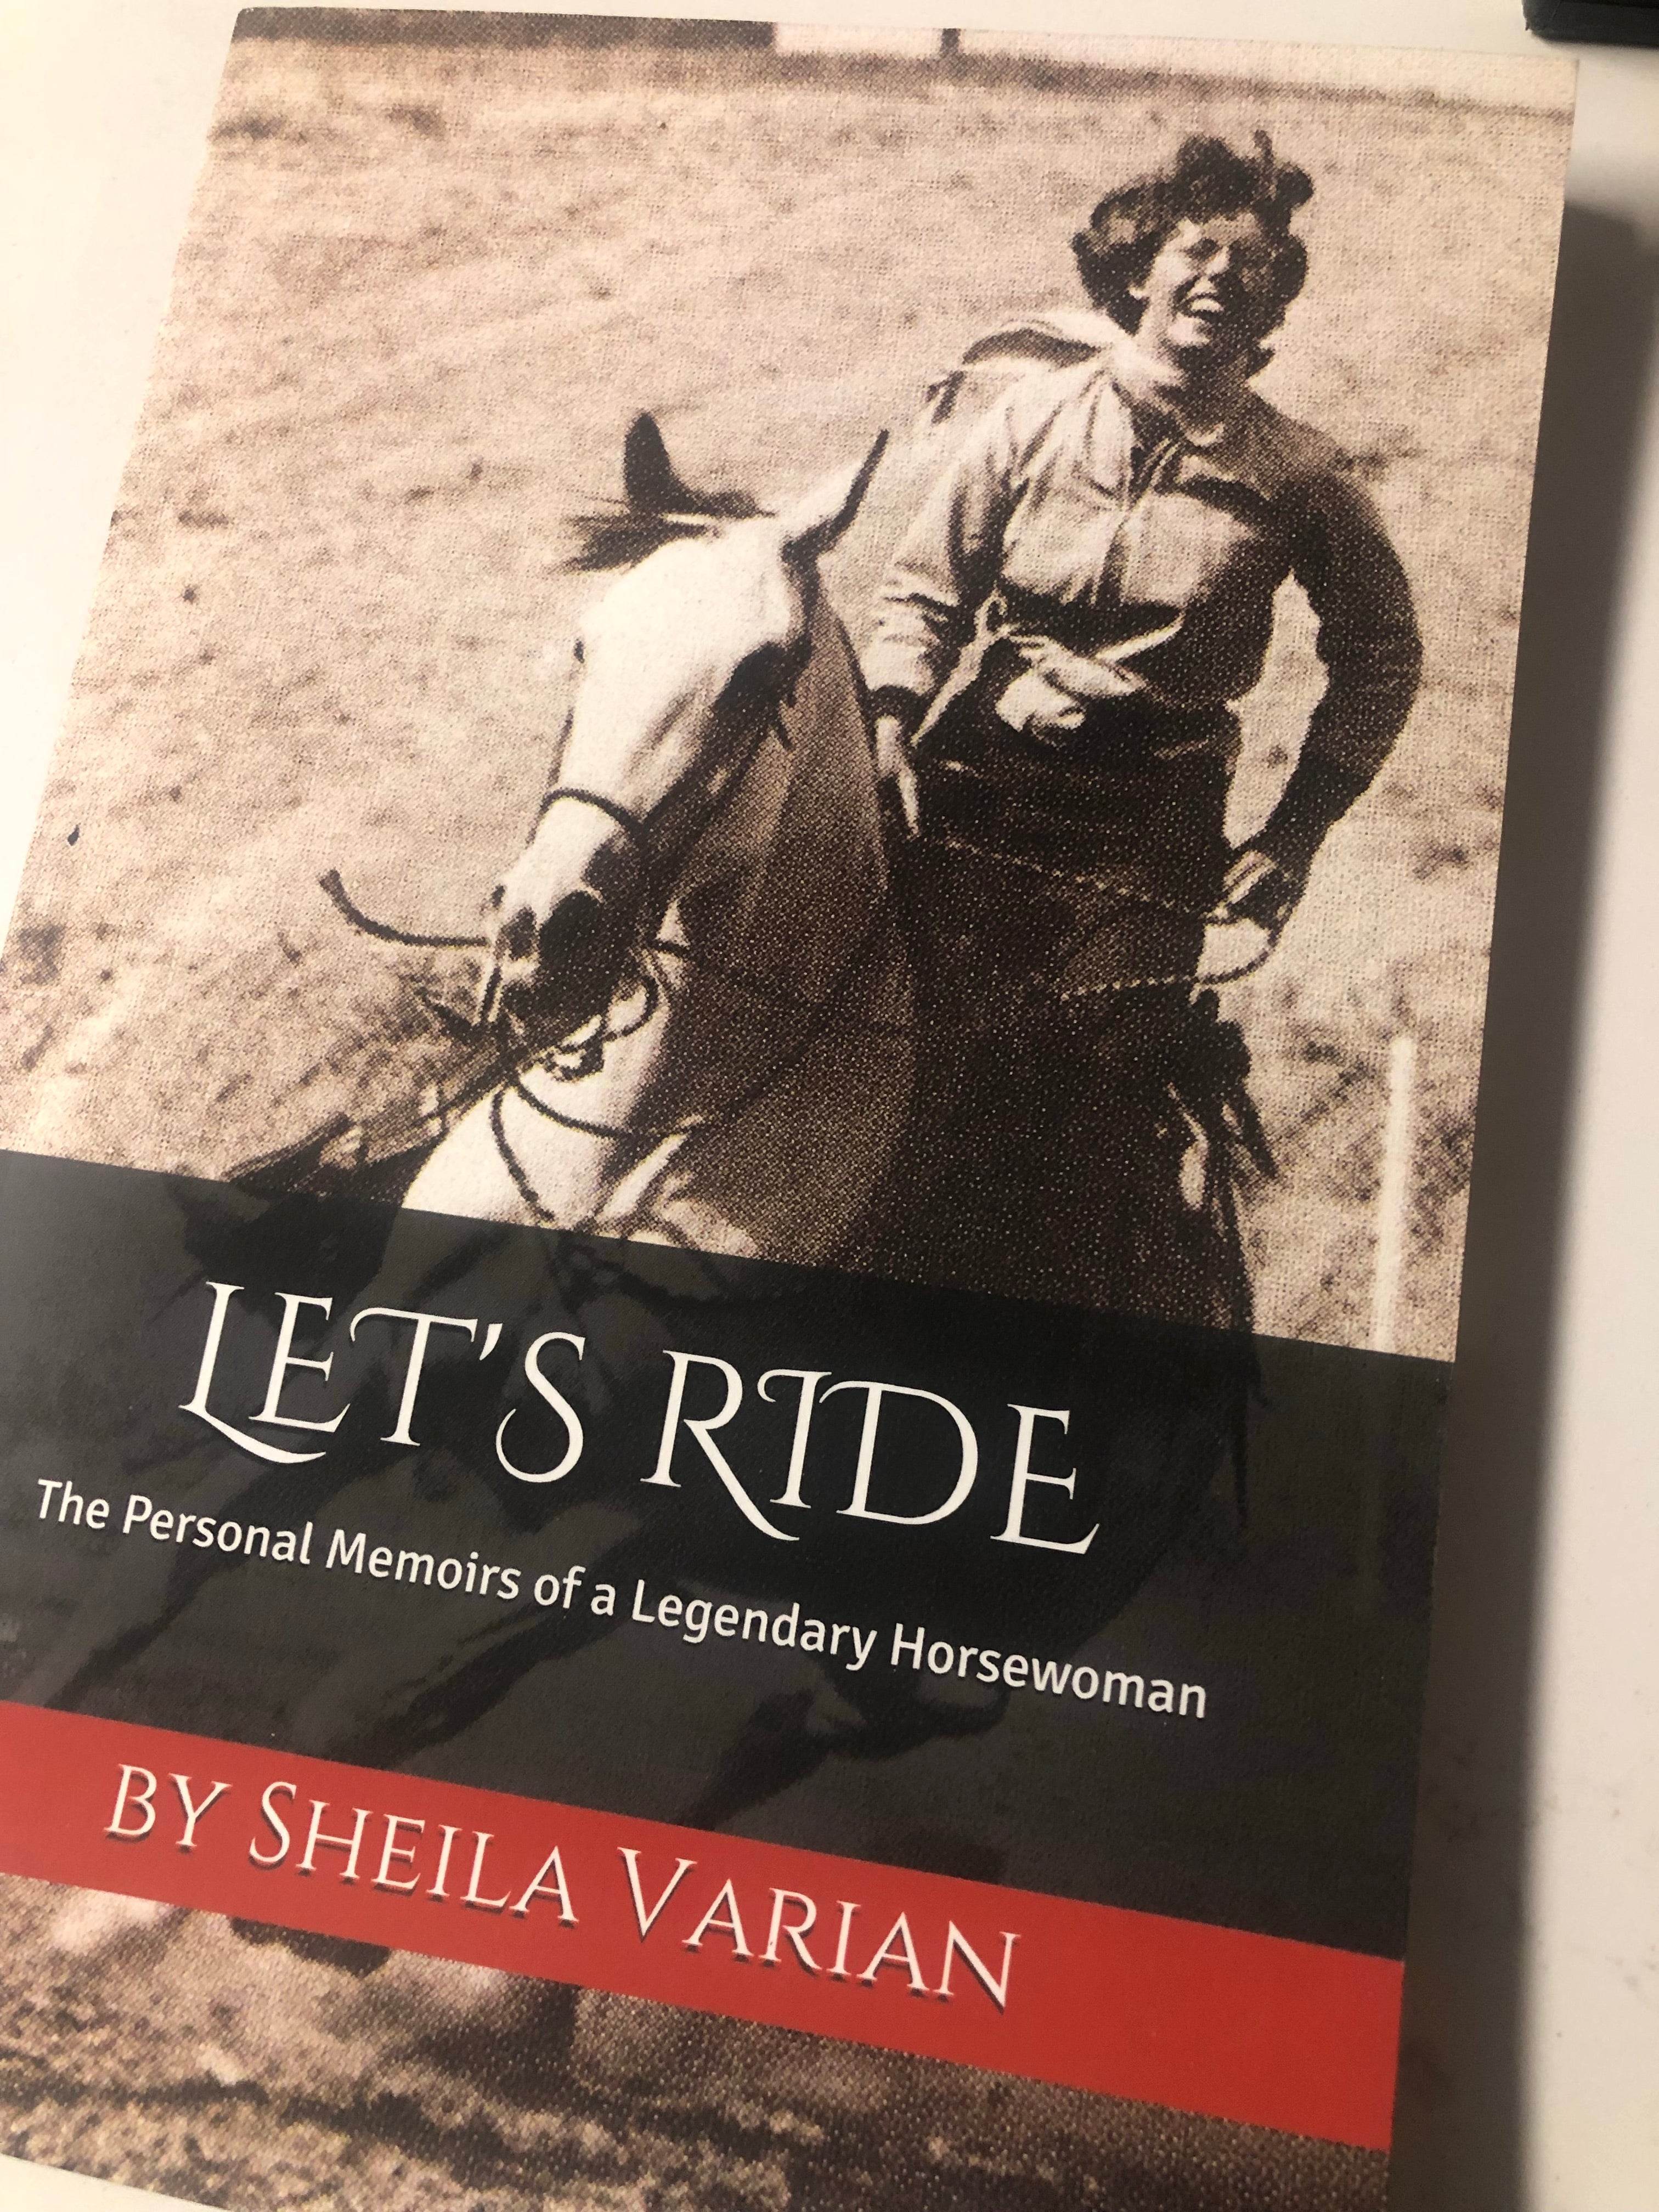 “Let’s Ride” The Personal Memoirs of a Legendary Horsewoman” by Sheila Varian